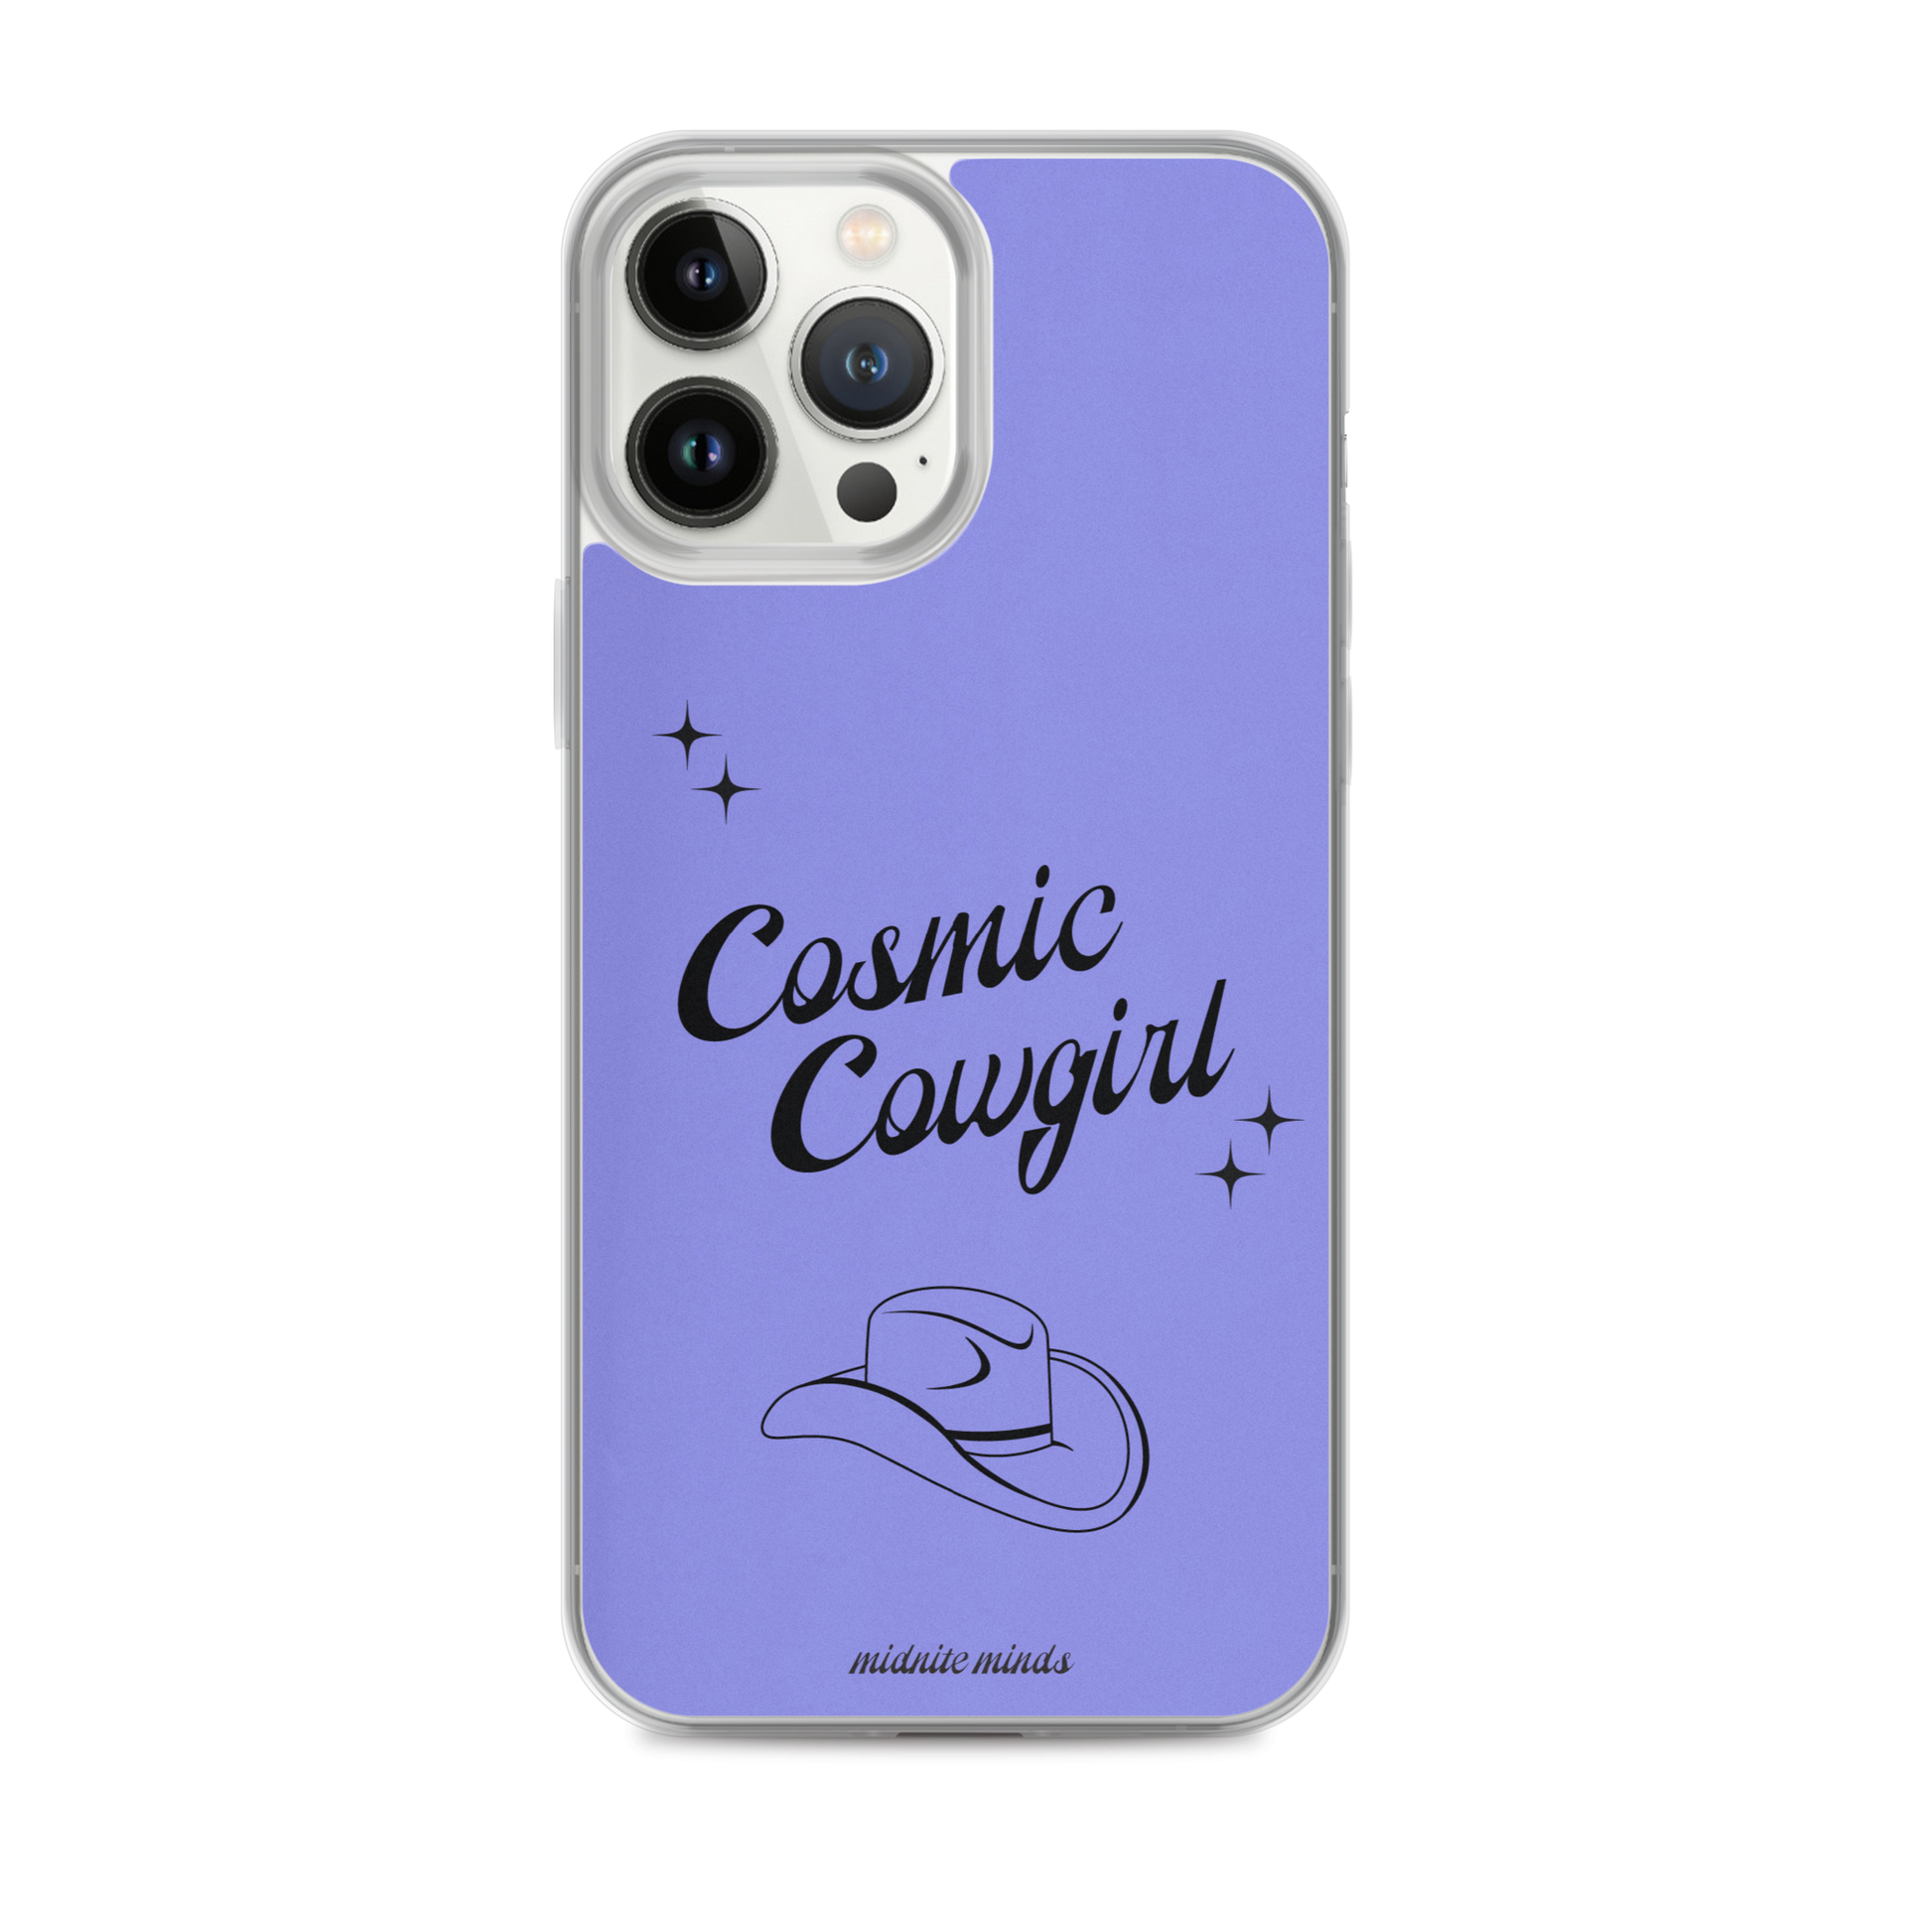 cowgirl iPhone case, cowgirl phone case, purple phone case, cowgirl aesthetic